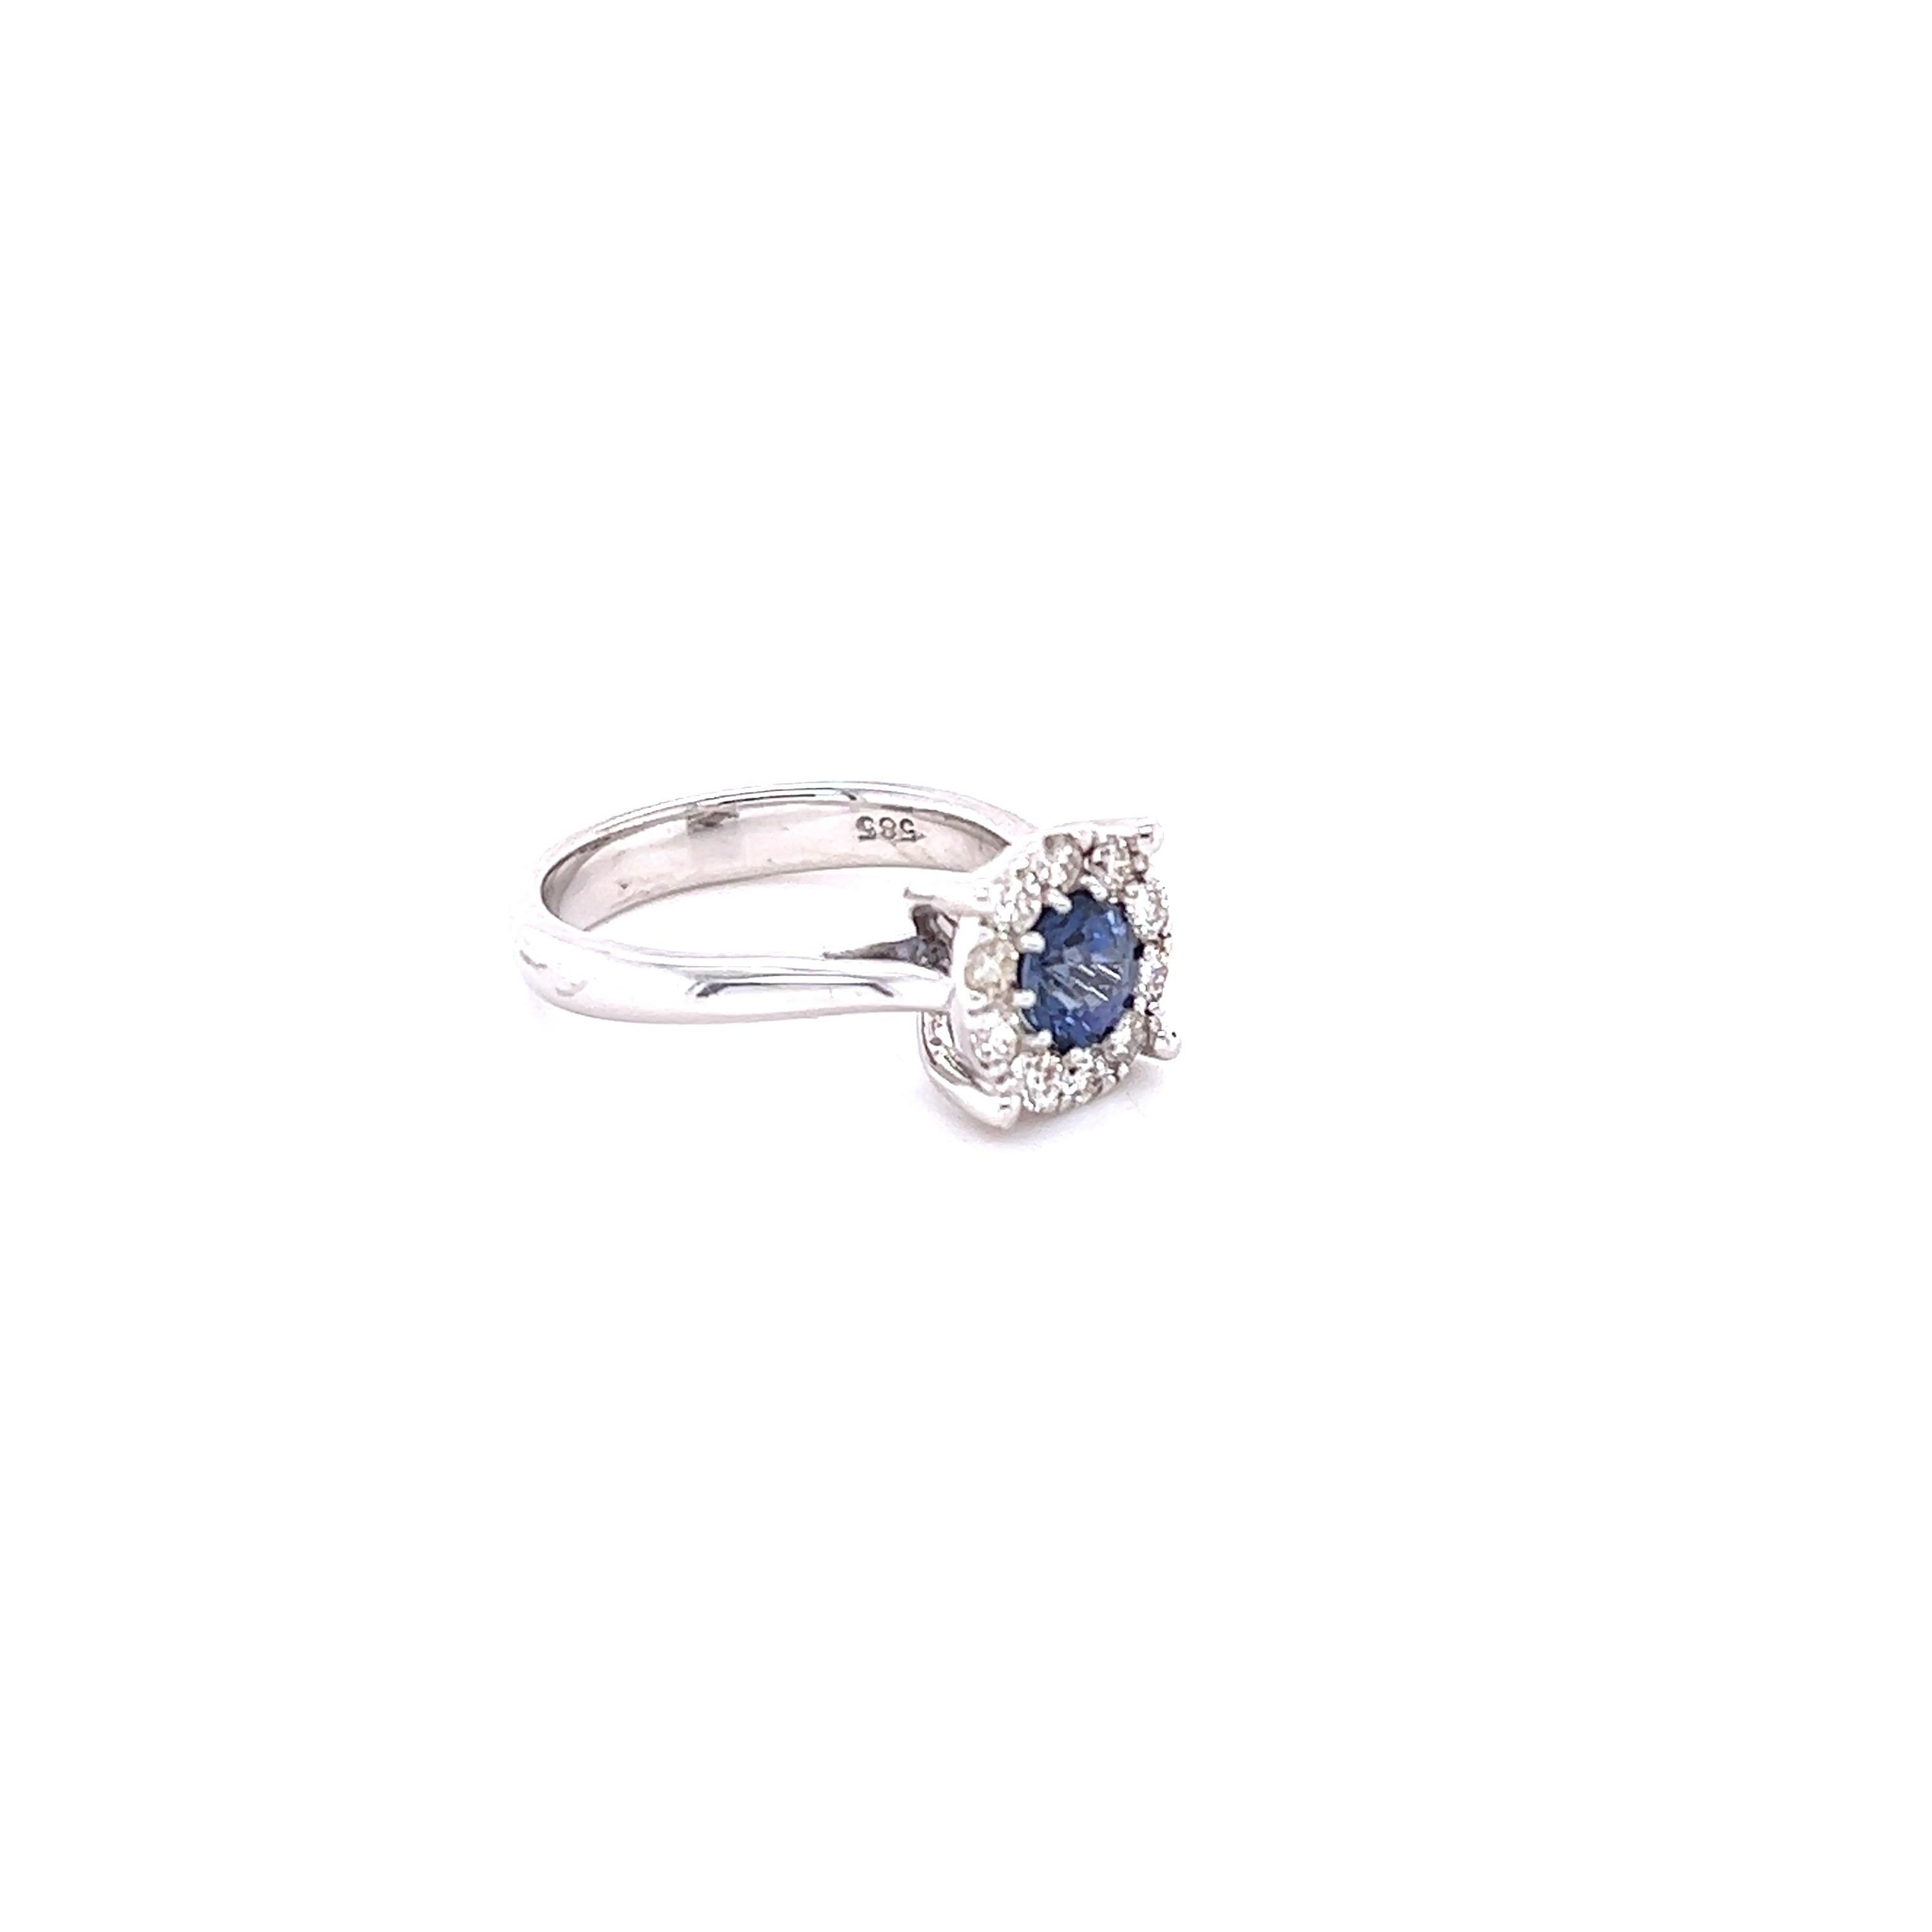 This beauty has a Round Cut Blue Sapphire that weighs 0.82 Carats and measures at 5 mm. It also has 10 Round Cut Diamonds that weigh 0.38 Carats. Clarity: VS, Color: H. The total carat weight of the ring is 1.20 Carats. 

It is set in 14 Karat White